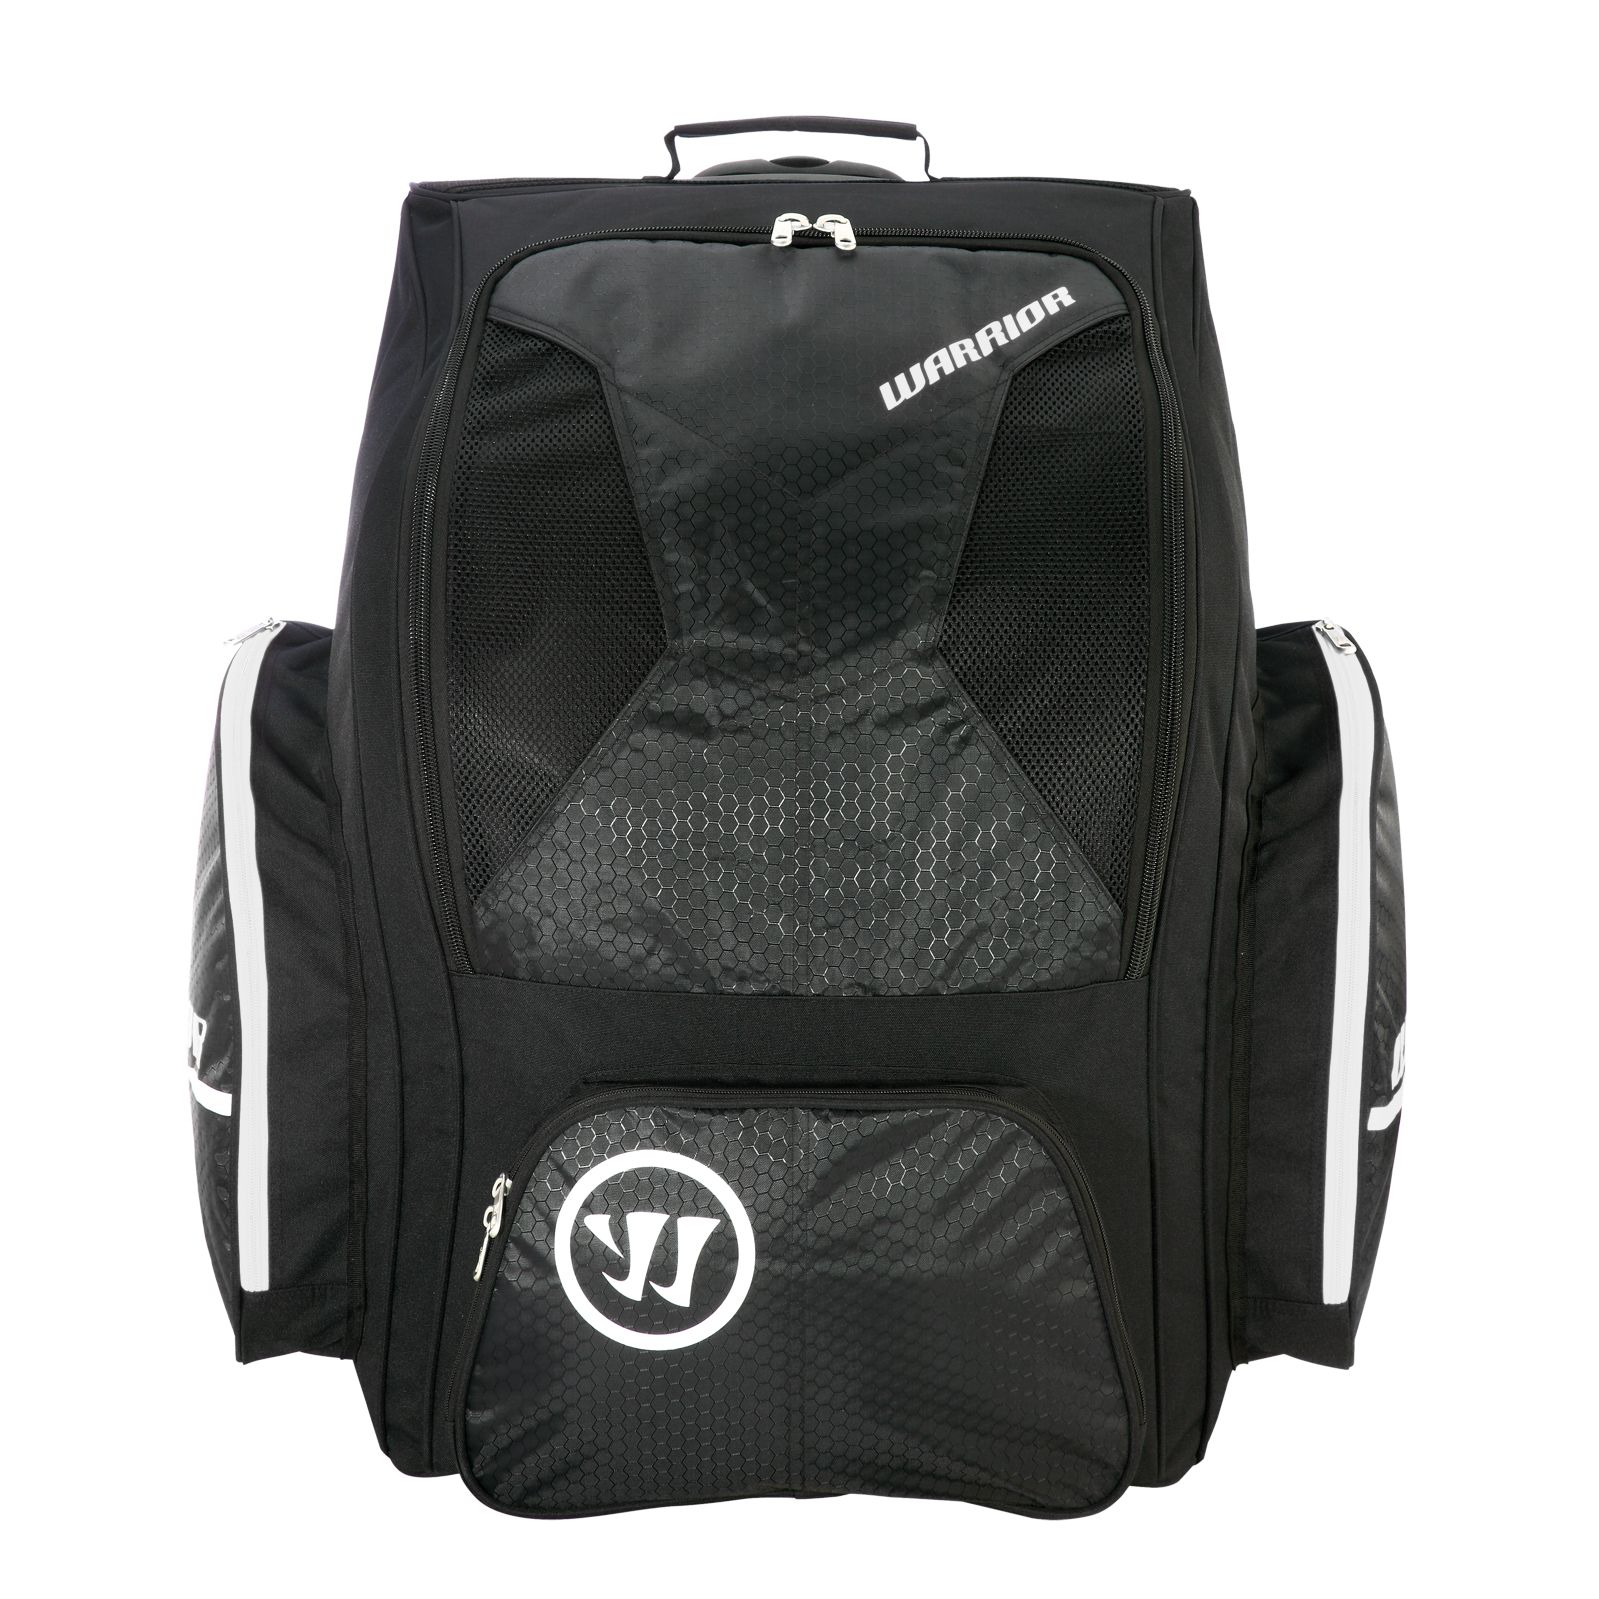 Covert Roller Backpack , Black with White image number 0